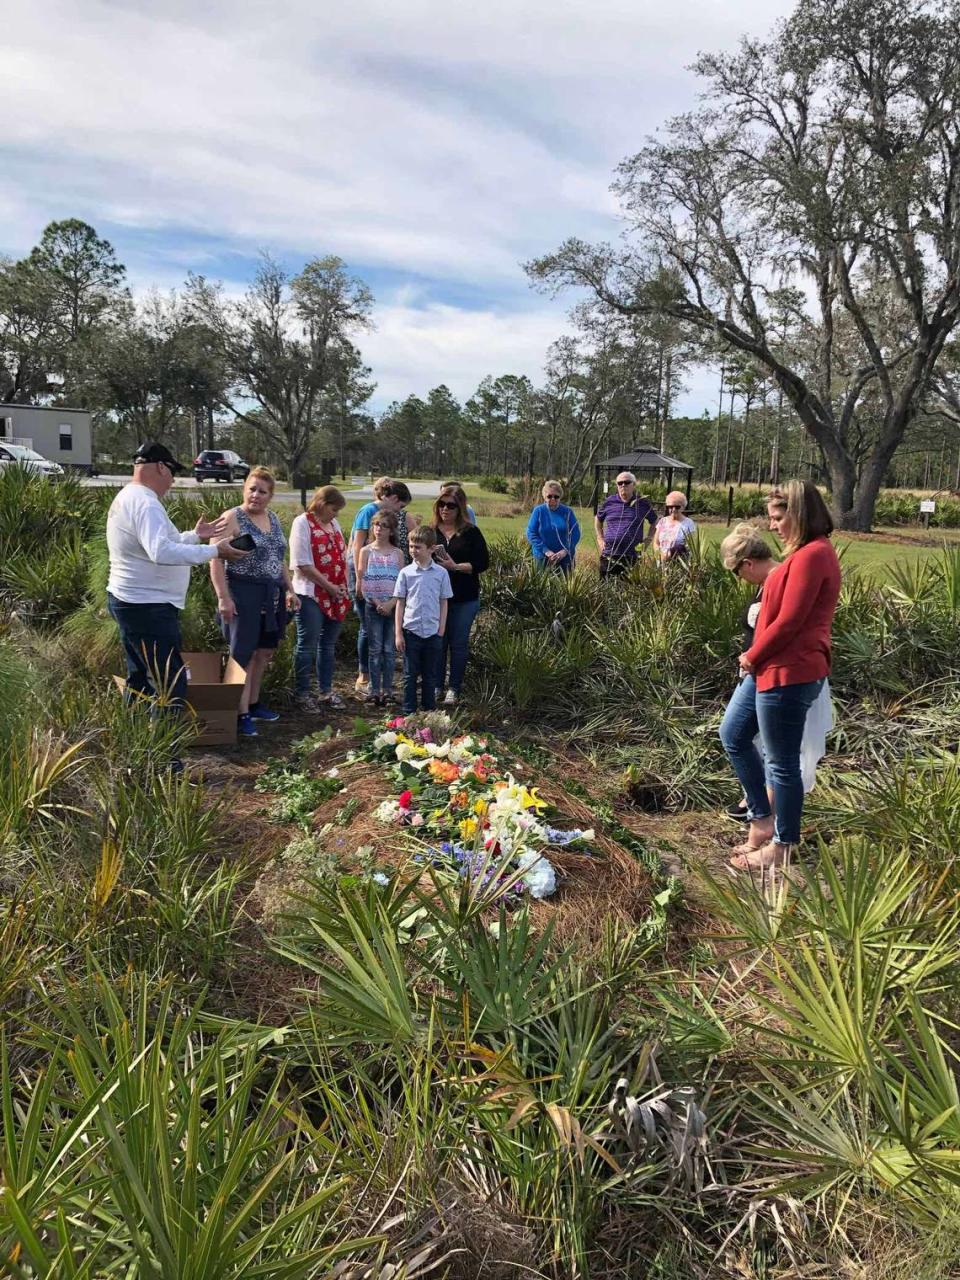 Mourners lay flowers on a freshly filled grave at Heartwood Preserve Conservation Cemetery near Tampa, Florida.